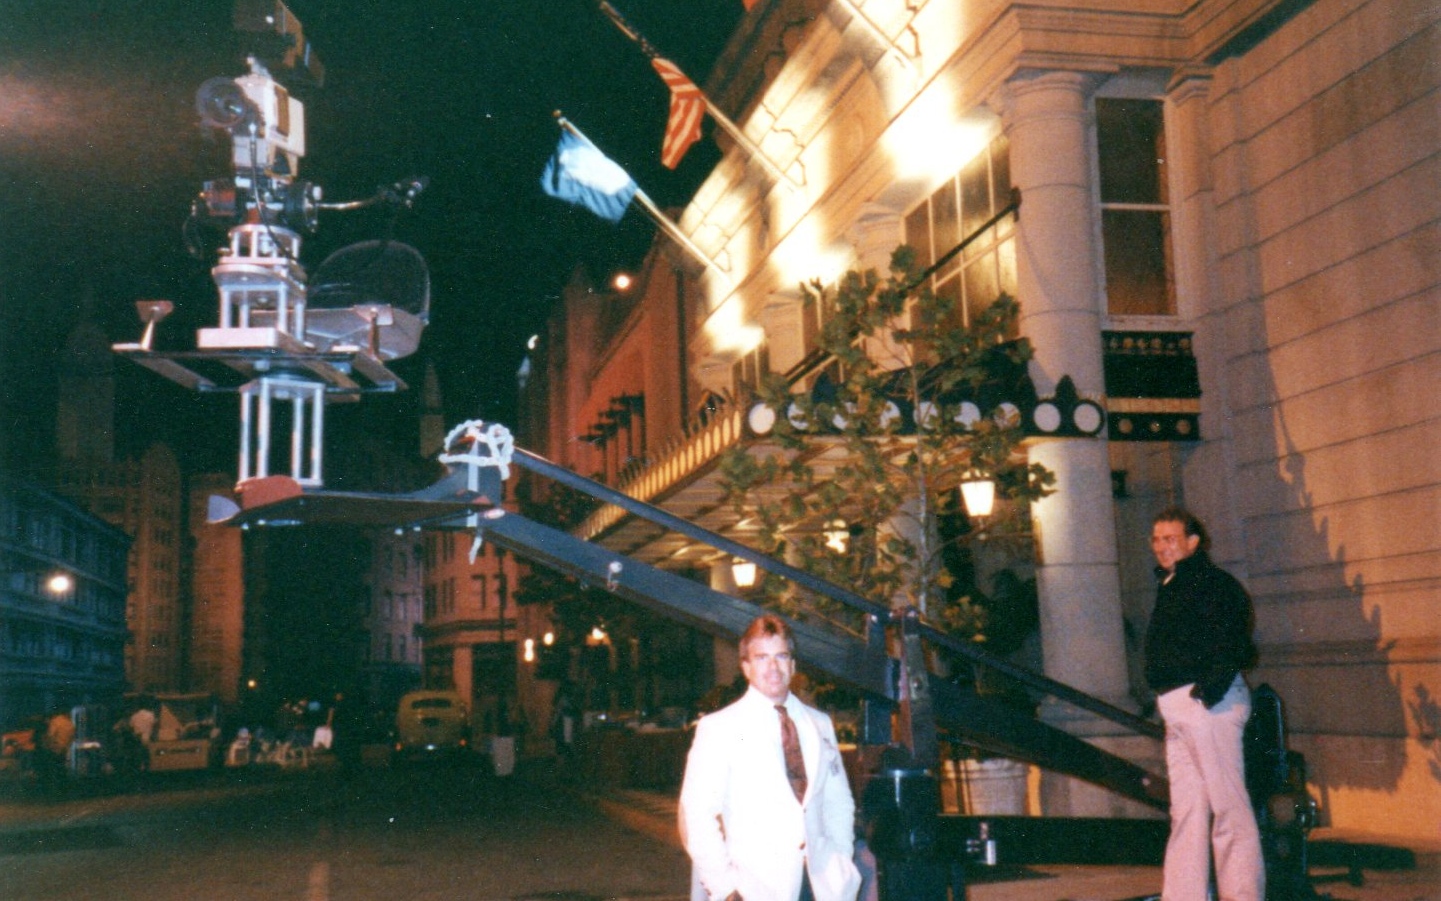 Cummings and J Atkinson on the backlot set filming